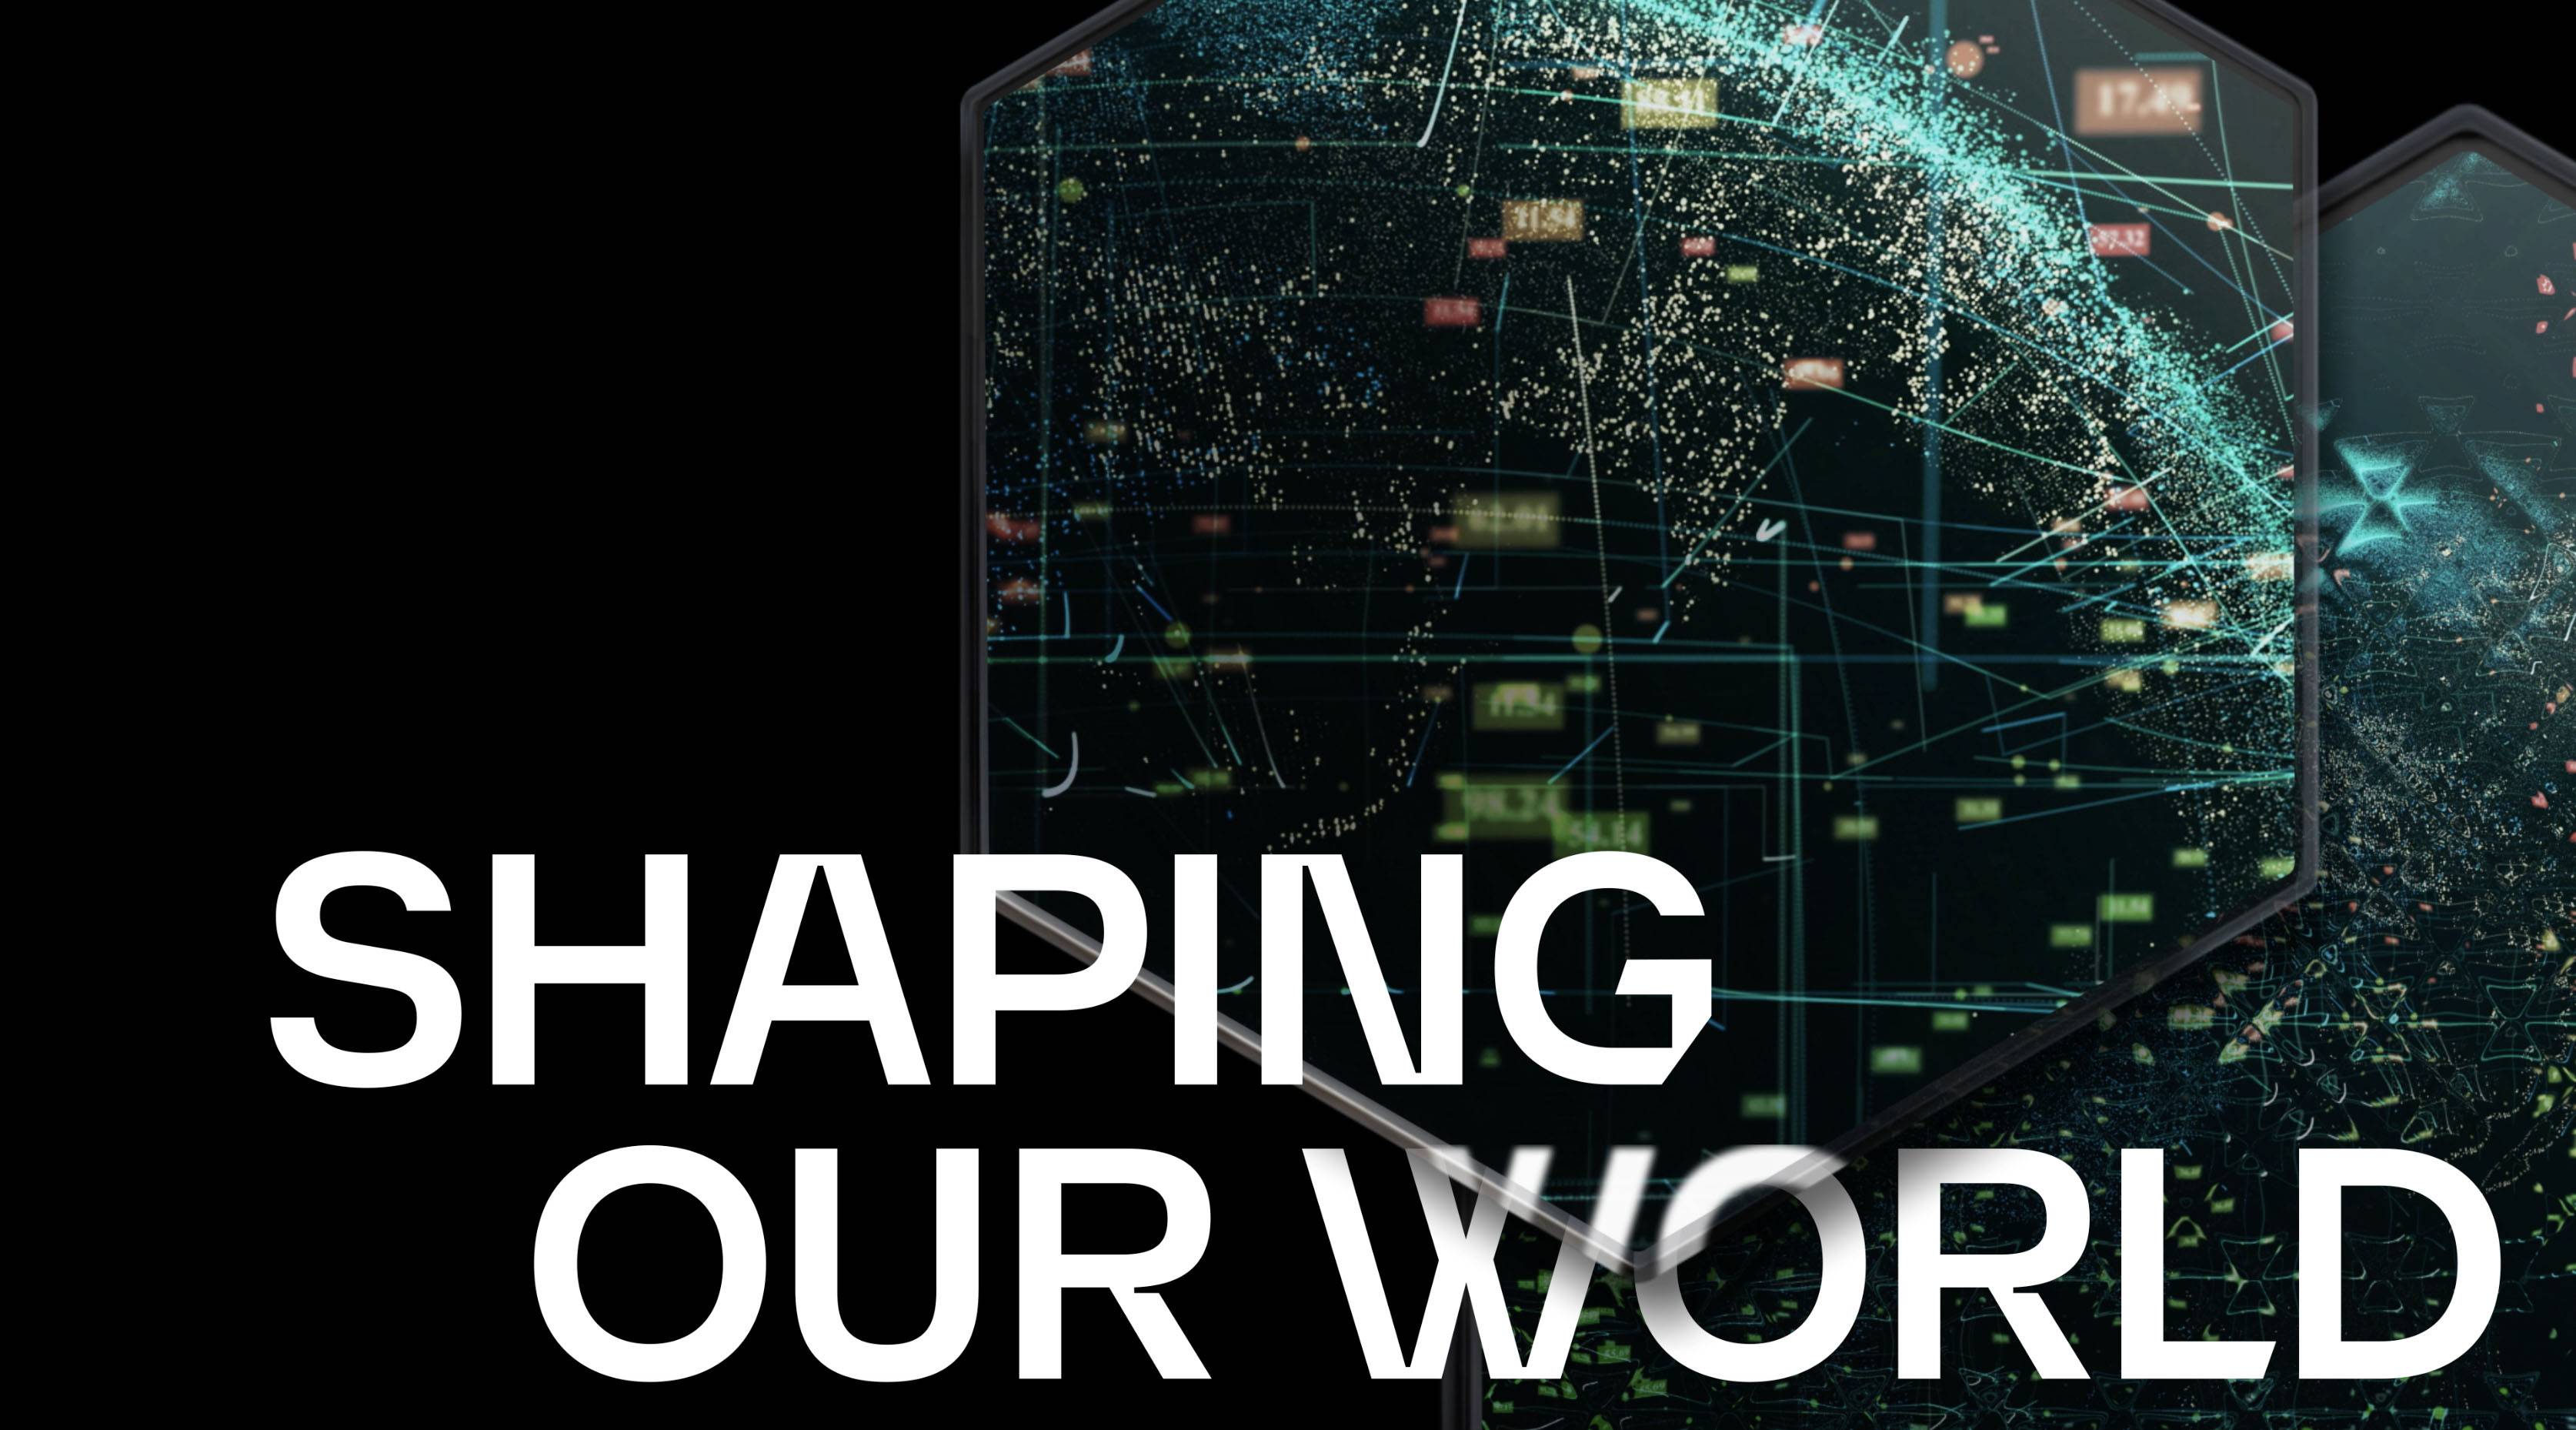 Image with white copy that reads "Shaping Our World"